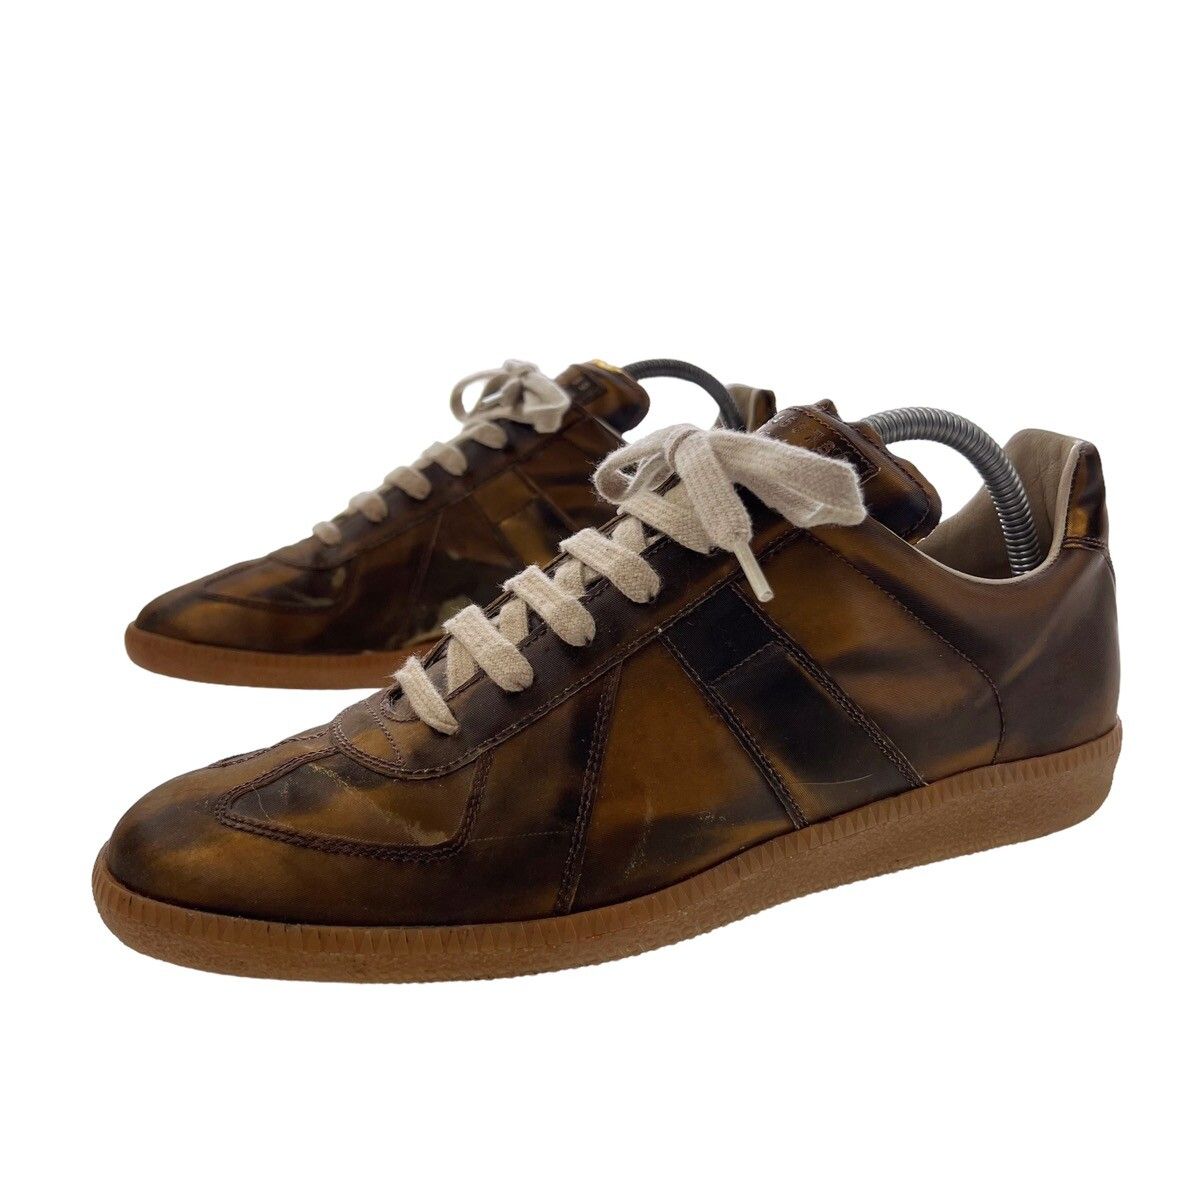 Pre-owned Maison Margiela Gold Replica Trainers Shoes